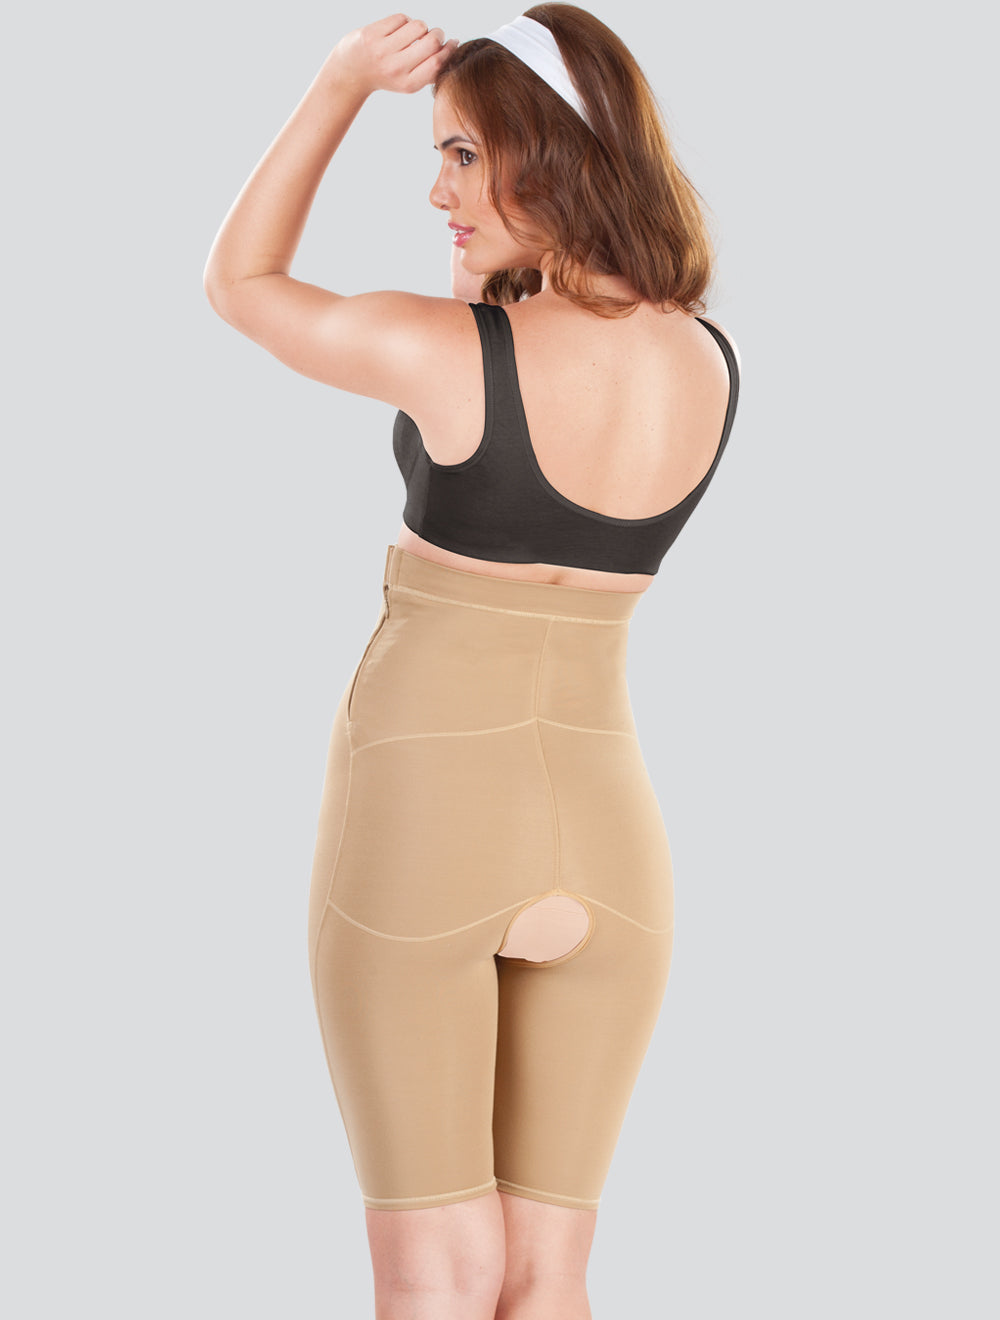 Sculptress Crotchless Hip Shapewear Girdle for Women India